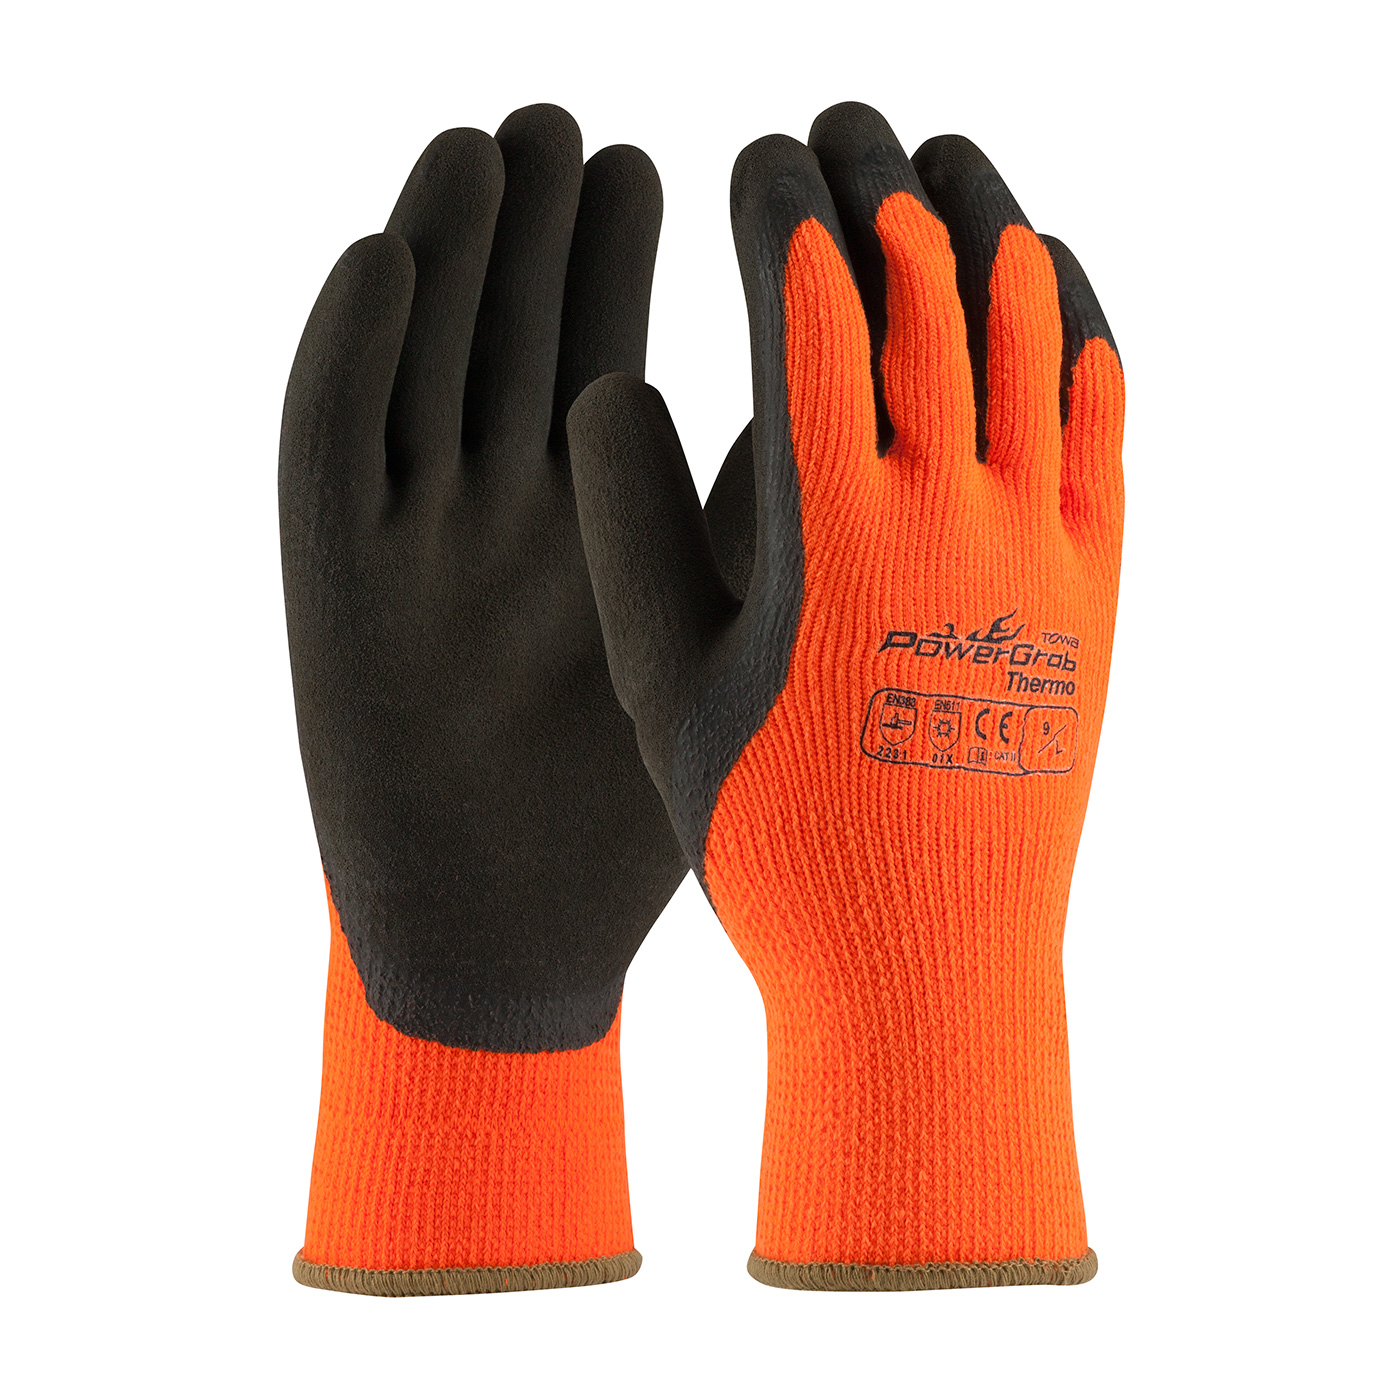 PIP 41-1400/S PowerGrab Thermo Hi-Vis Seamless Knit Acrylic Terry Glove with Latex MicroFinish Grip on Palm & Fingers - Small PID-41 1400 S